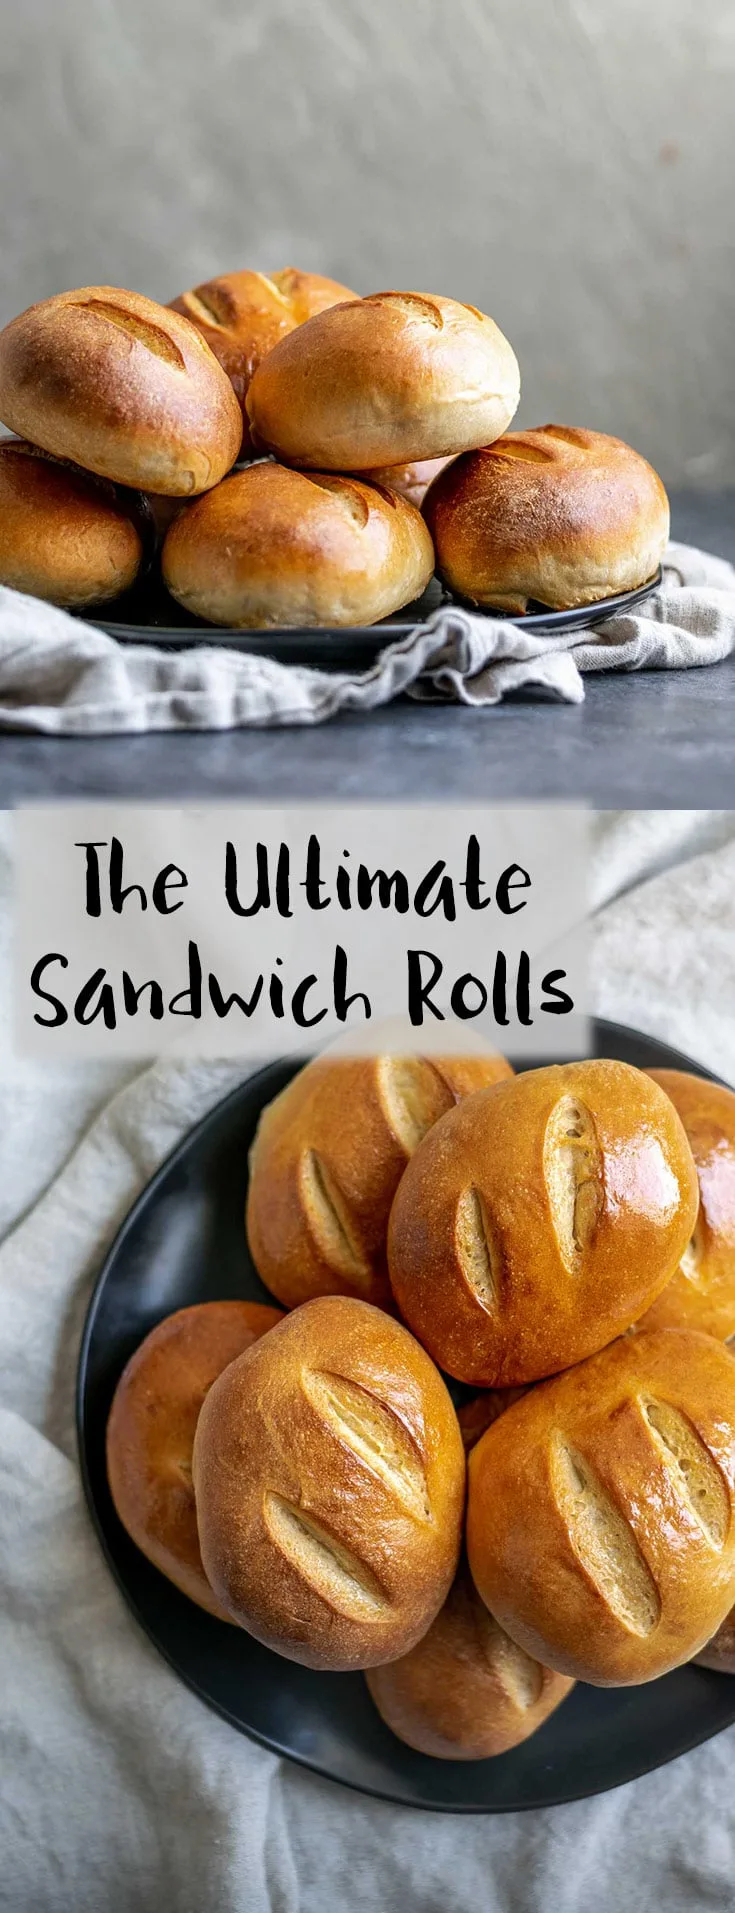 A soft and slightly crusty bread perfect for stuffing with your favorite sandwich fillings. A lightly enriched dough, these ultimate homemade sandwich rolls make great tortas, banh mi, subs, and more! | thecuriouschickpea.com